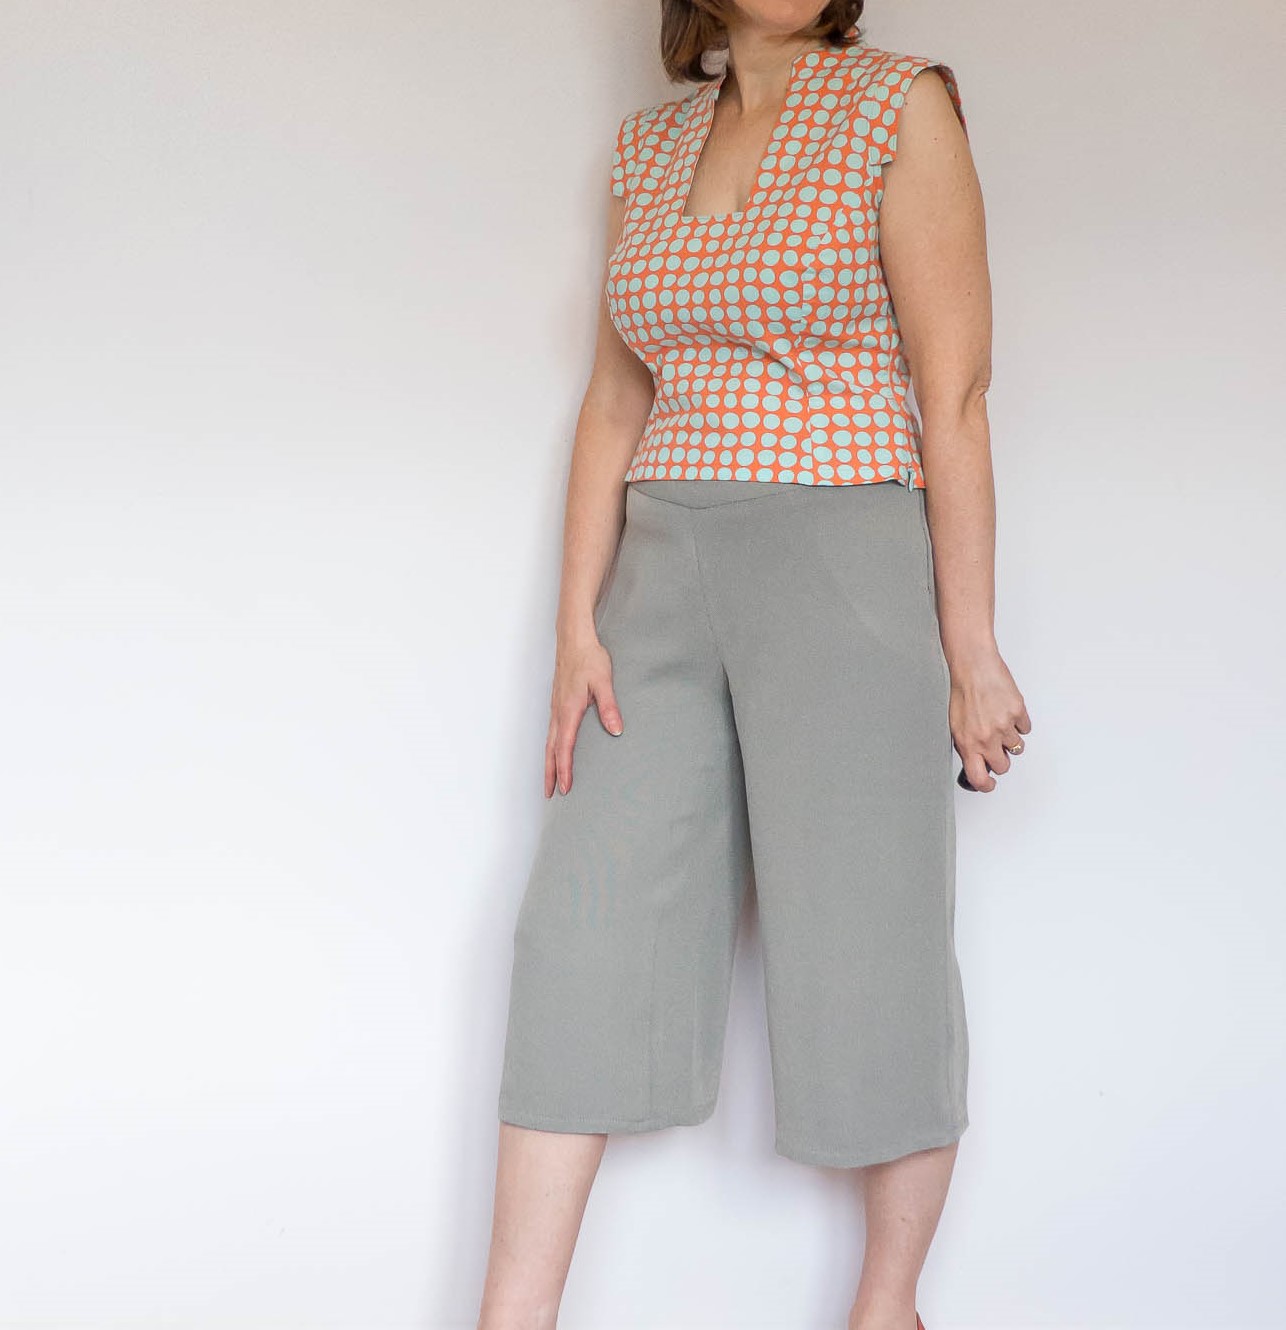 Self-designed fitted cropped top